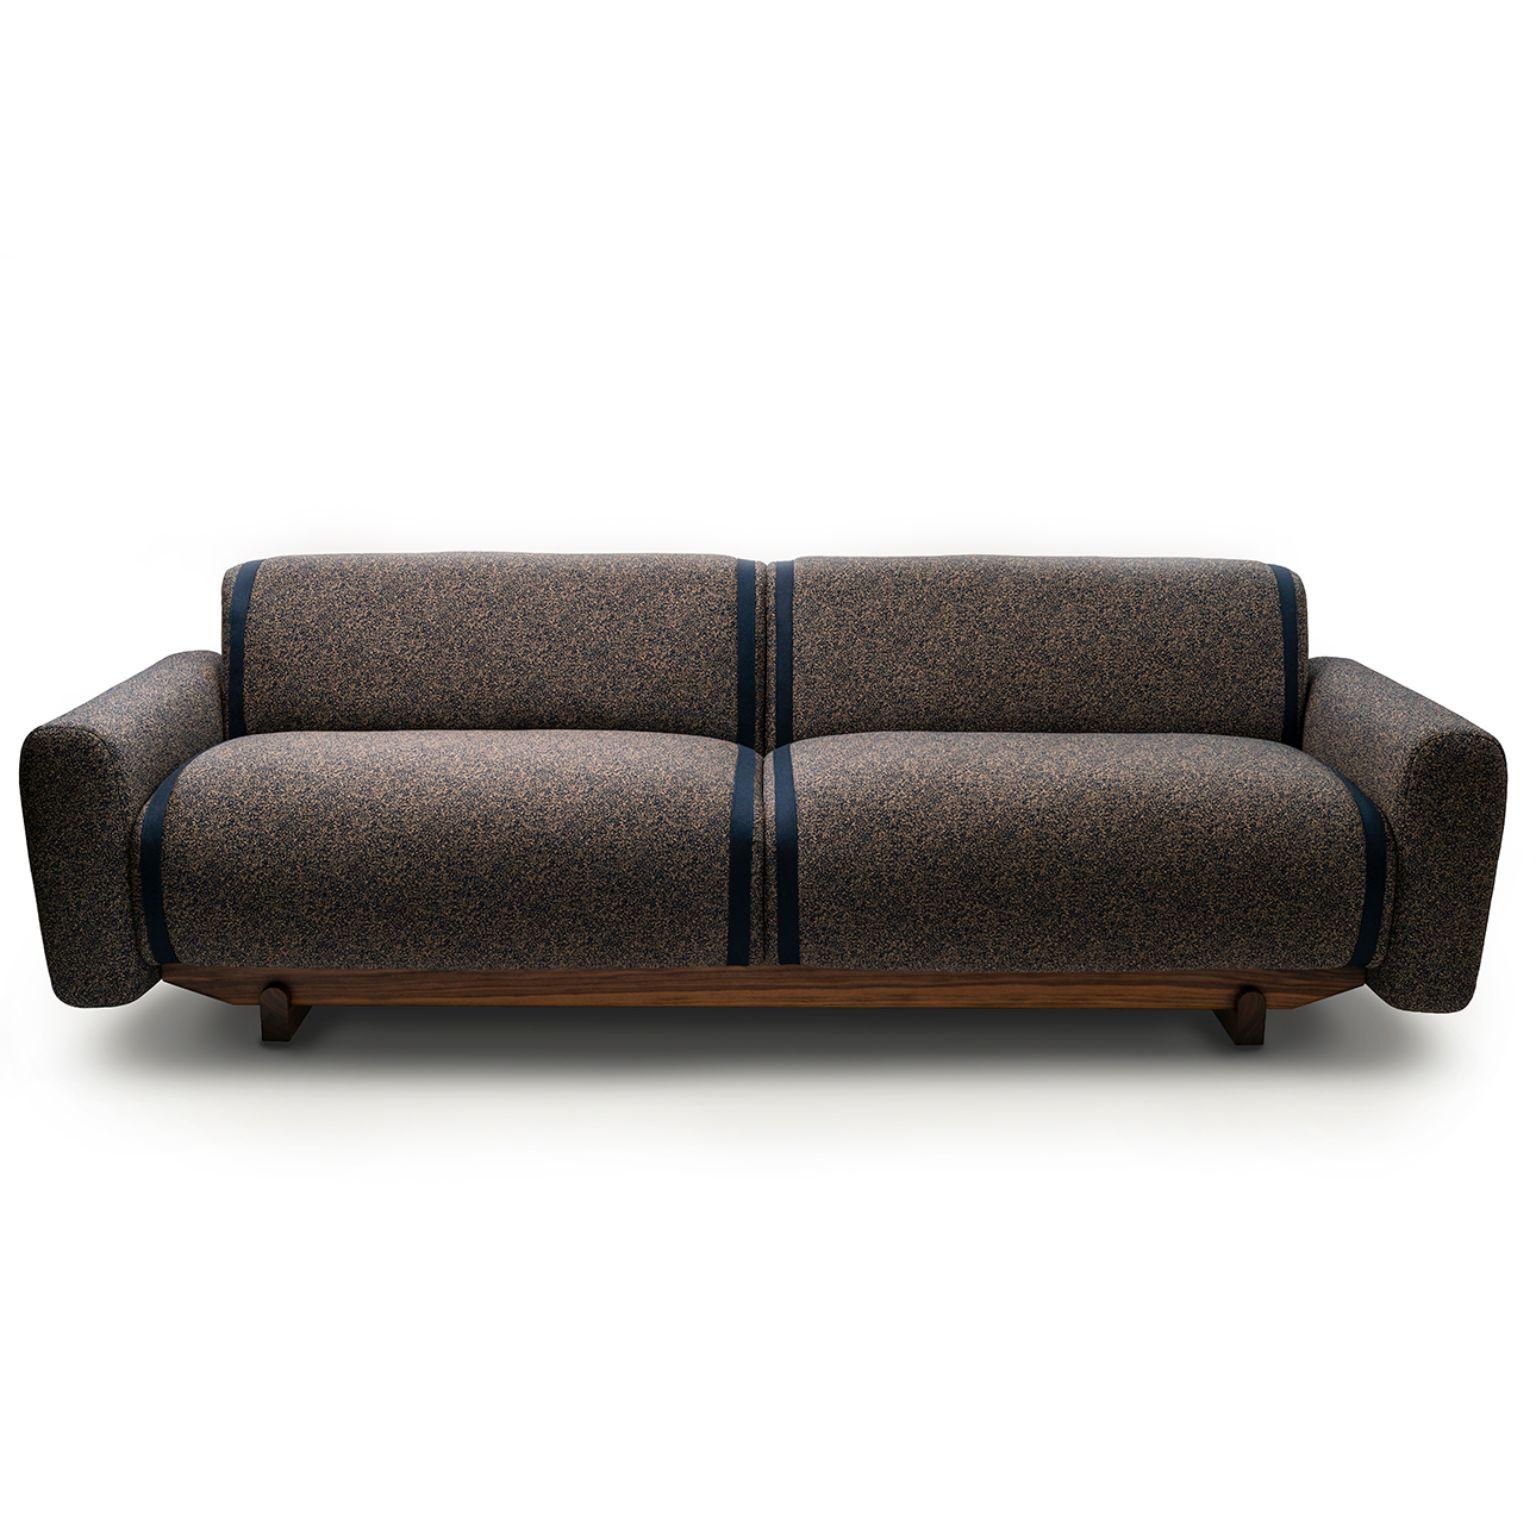 3 seats pola sofa by Sebastian Herkner
Materials: Upholstery: Fabric or leather
 Structure: Stained wood, Noce Canaletto solid wood
Dimensions: W247.5 x D92.5 x H75.5 cm




The massive wood base of the Pola sofa is a nod to Sebastian